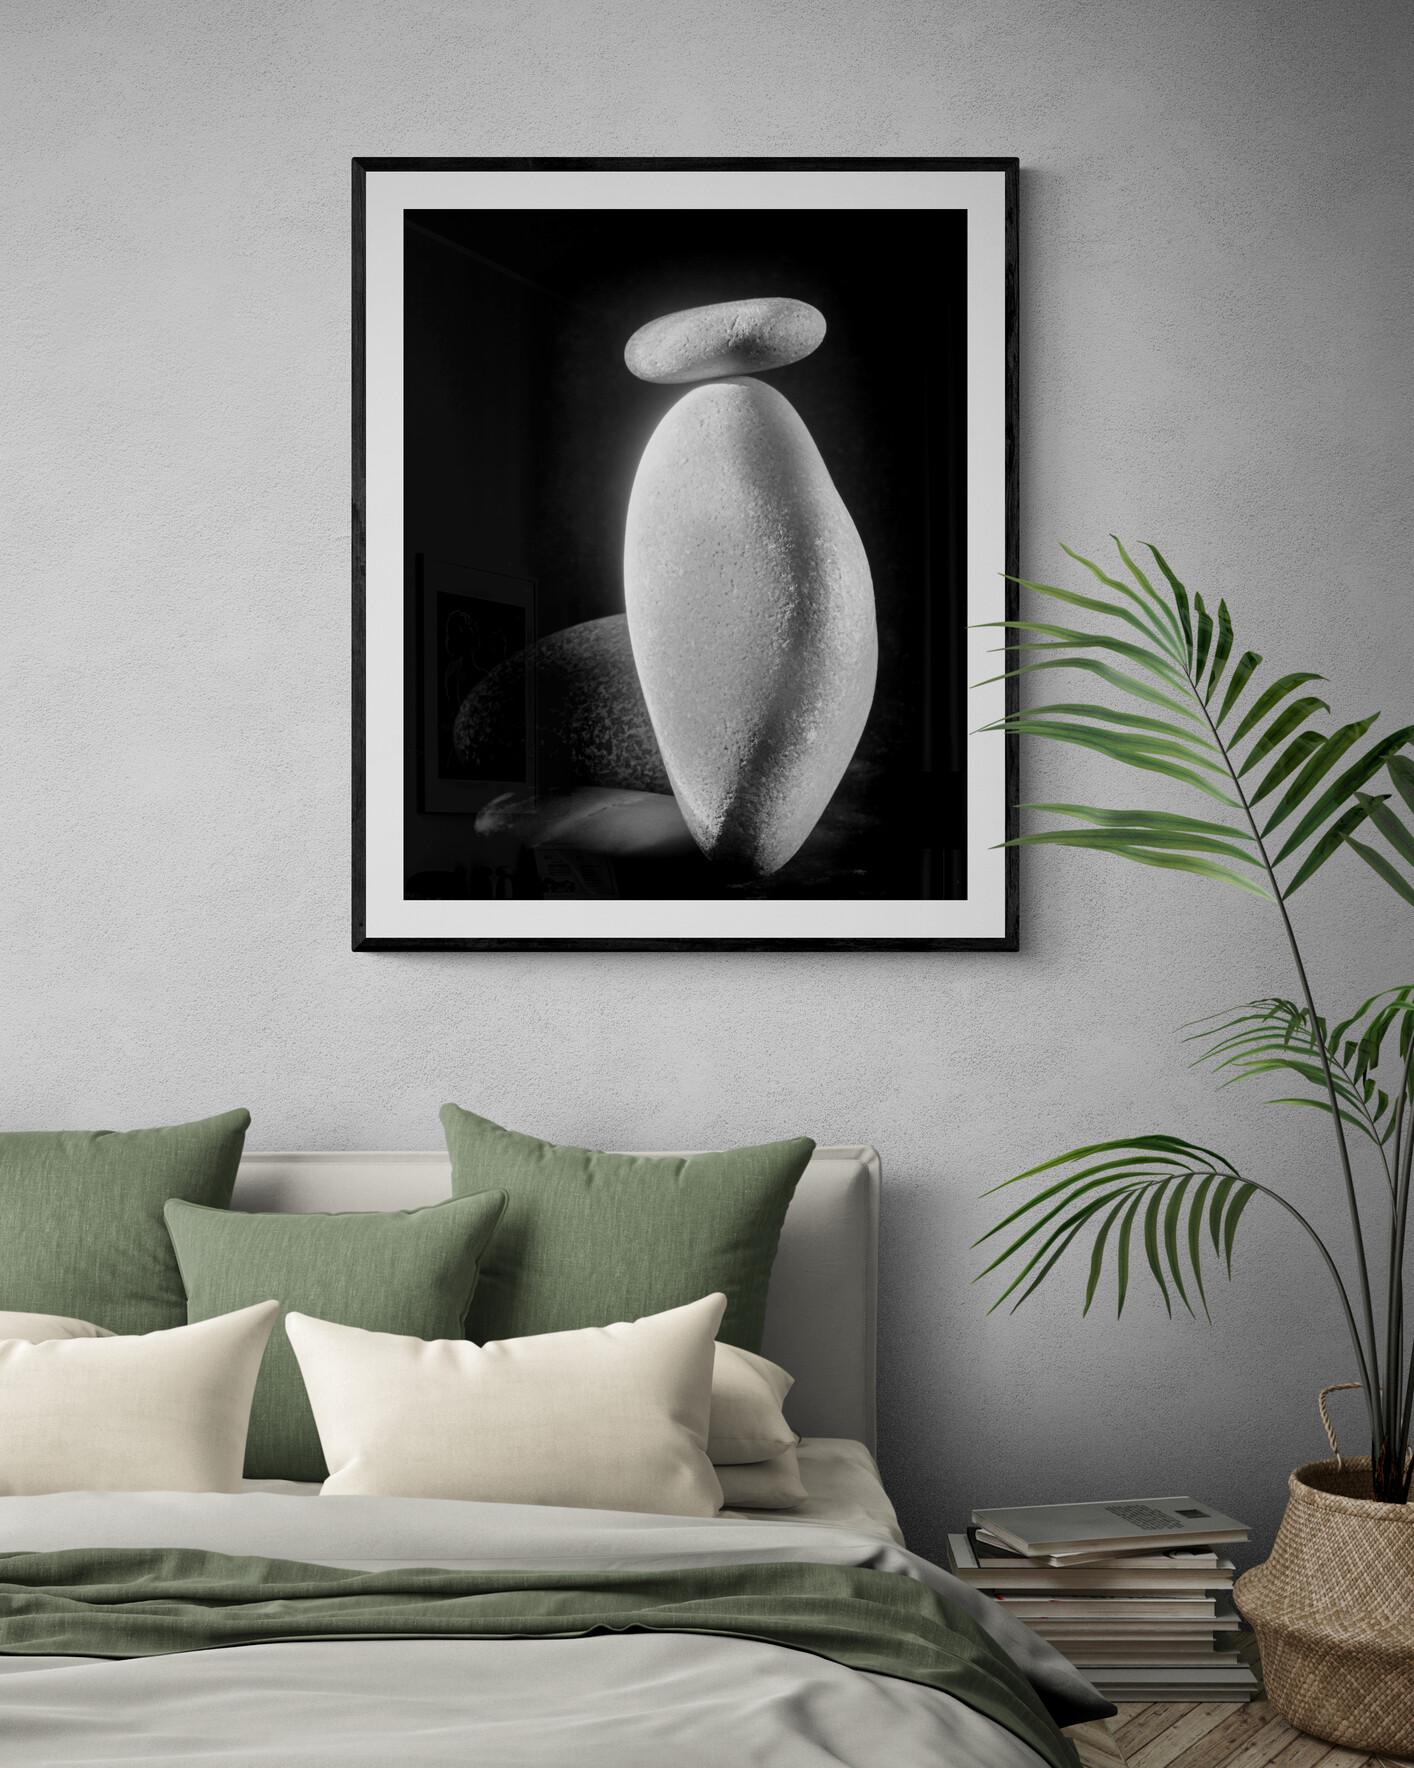  Limited Edition Black and White Still Life Photograph Water Stones #29 For Sale 1